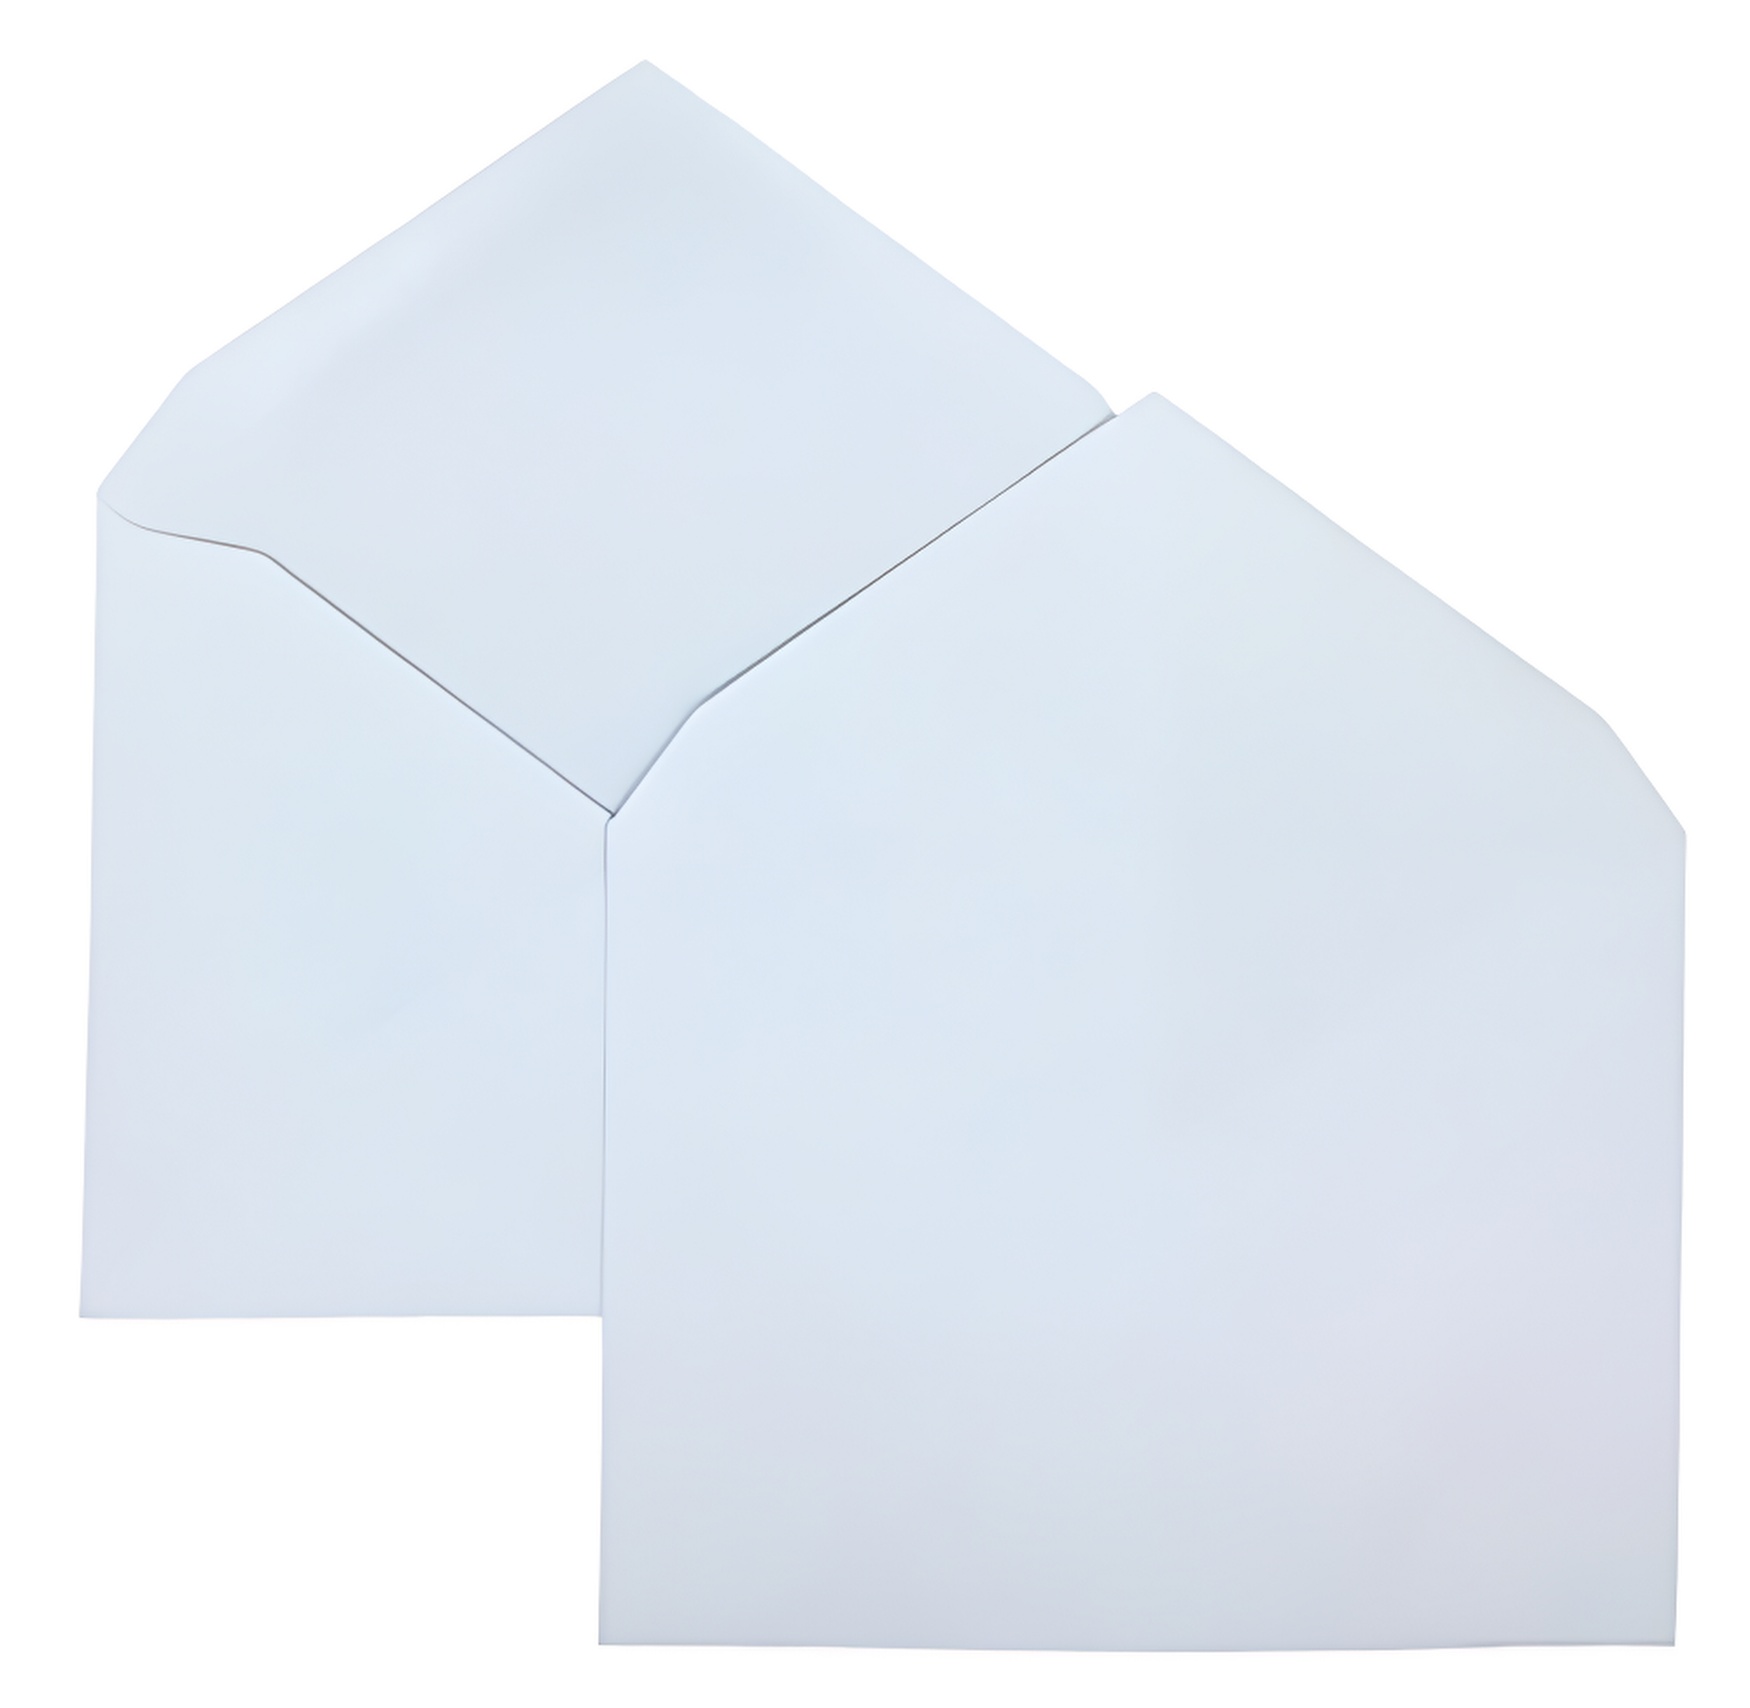 Image of ID 1214262203 2000 ShippingMailers 4 3/8 x 5 3/4 White Paper A2 Invitation Envelopes /w Gummed Closure